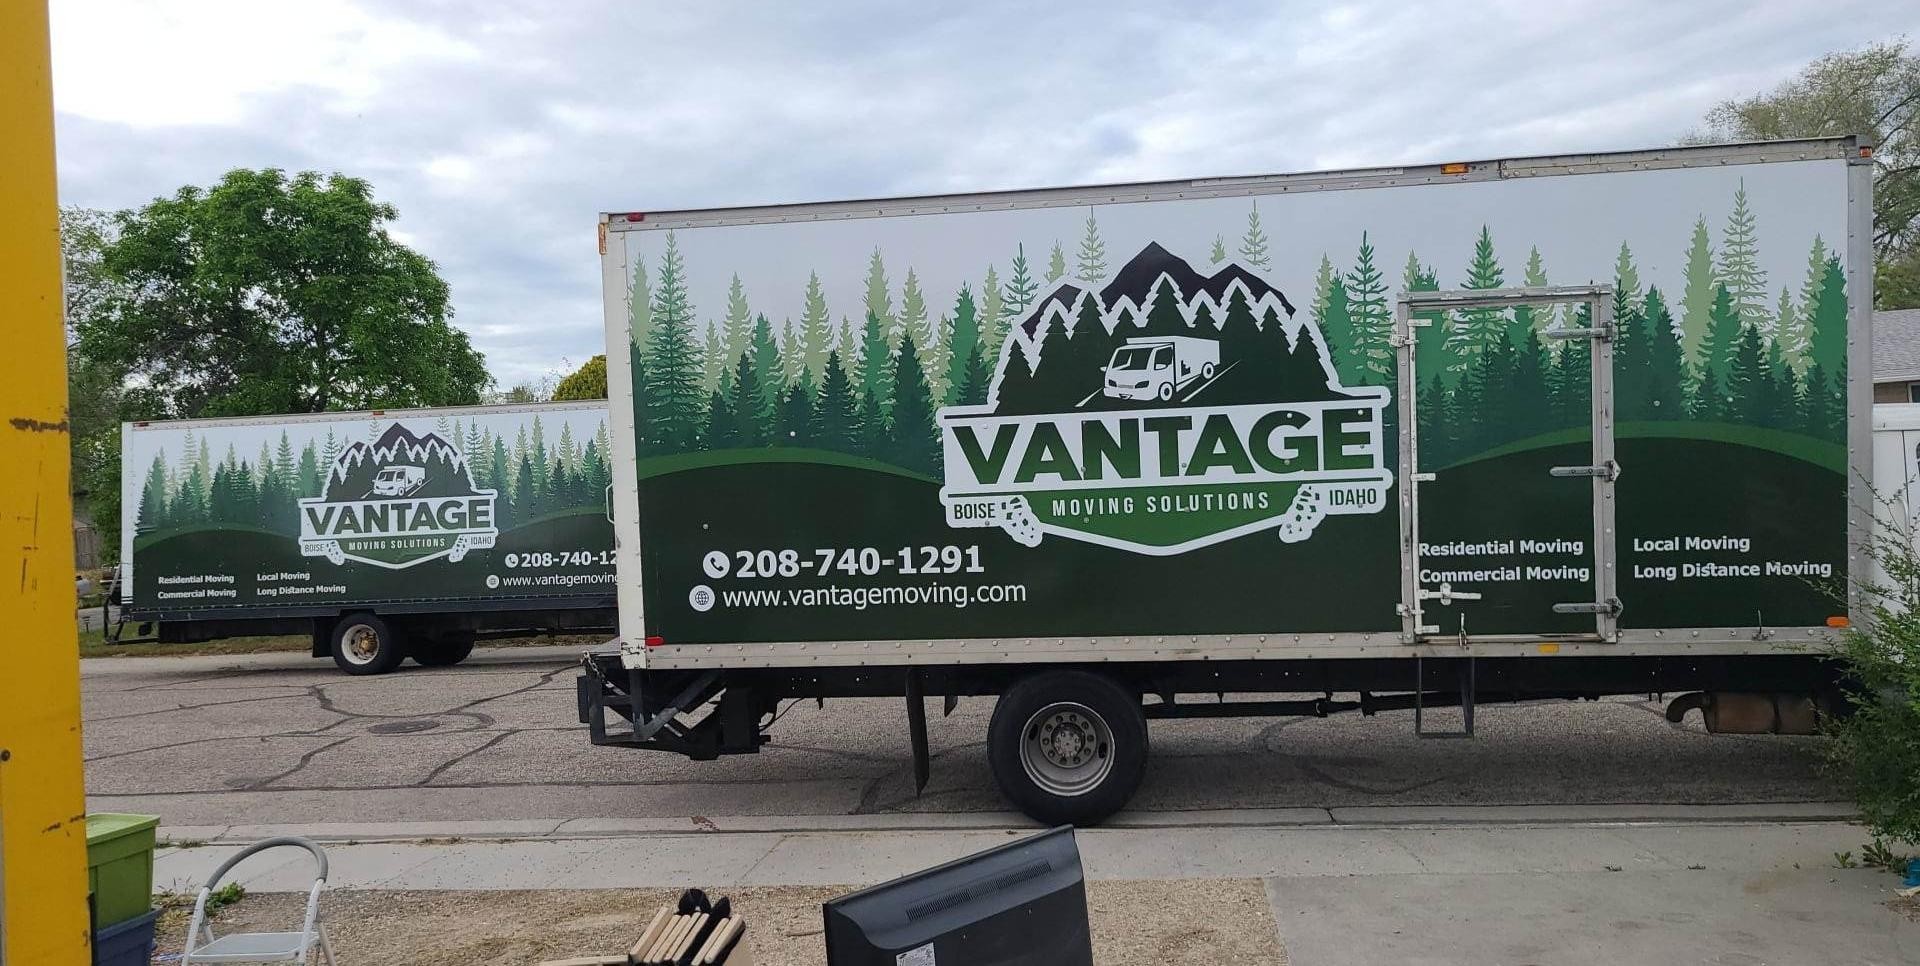 Vantage Moving Solution - Professional Moving You Can Trust